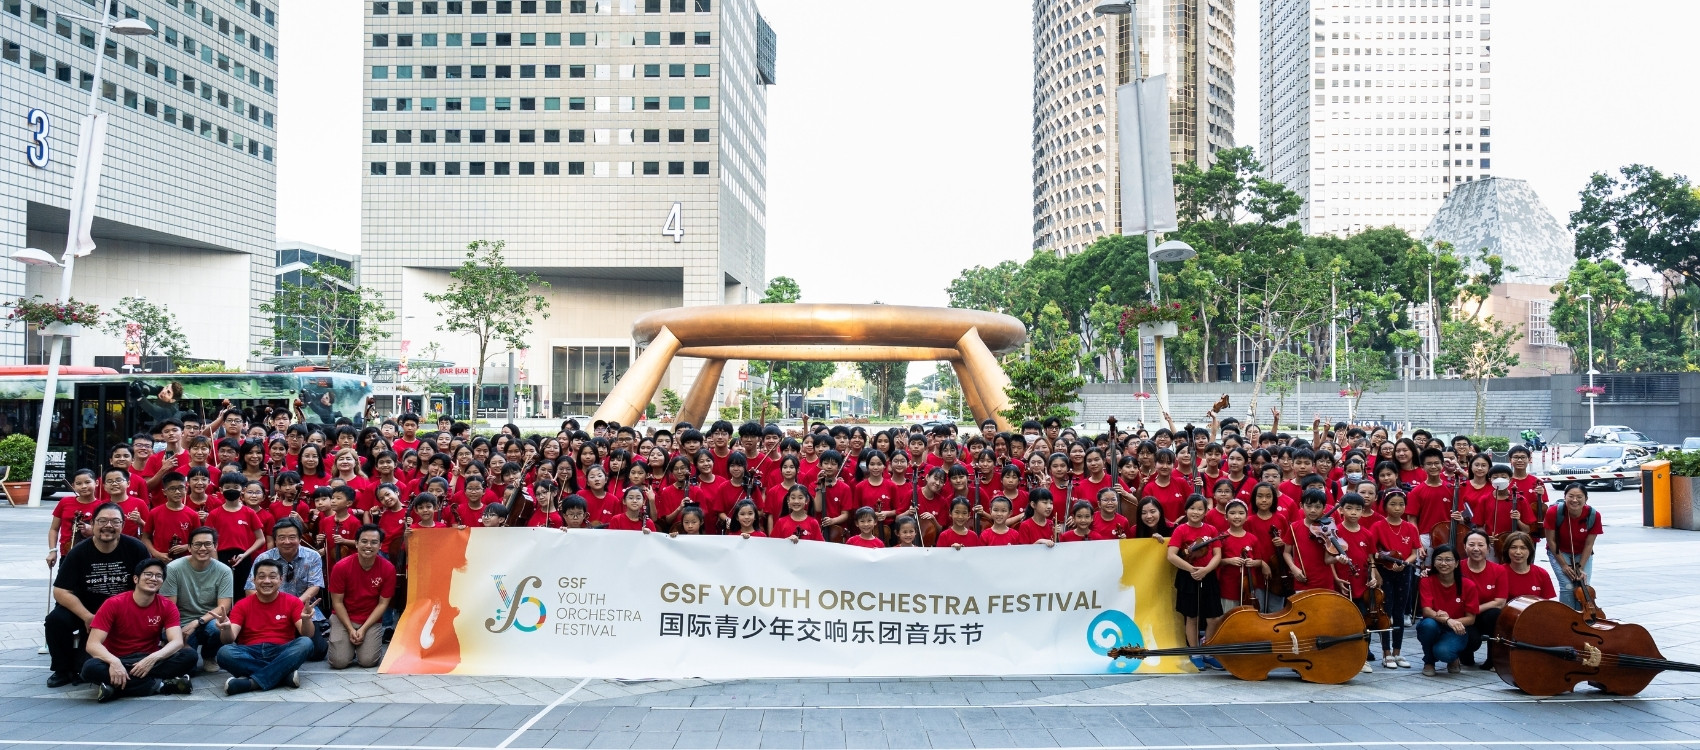 GSF youth orchestra festival